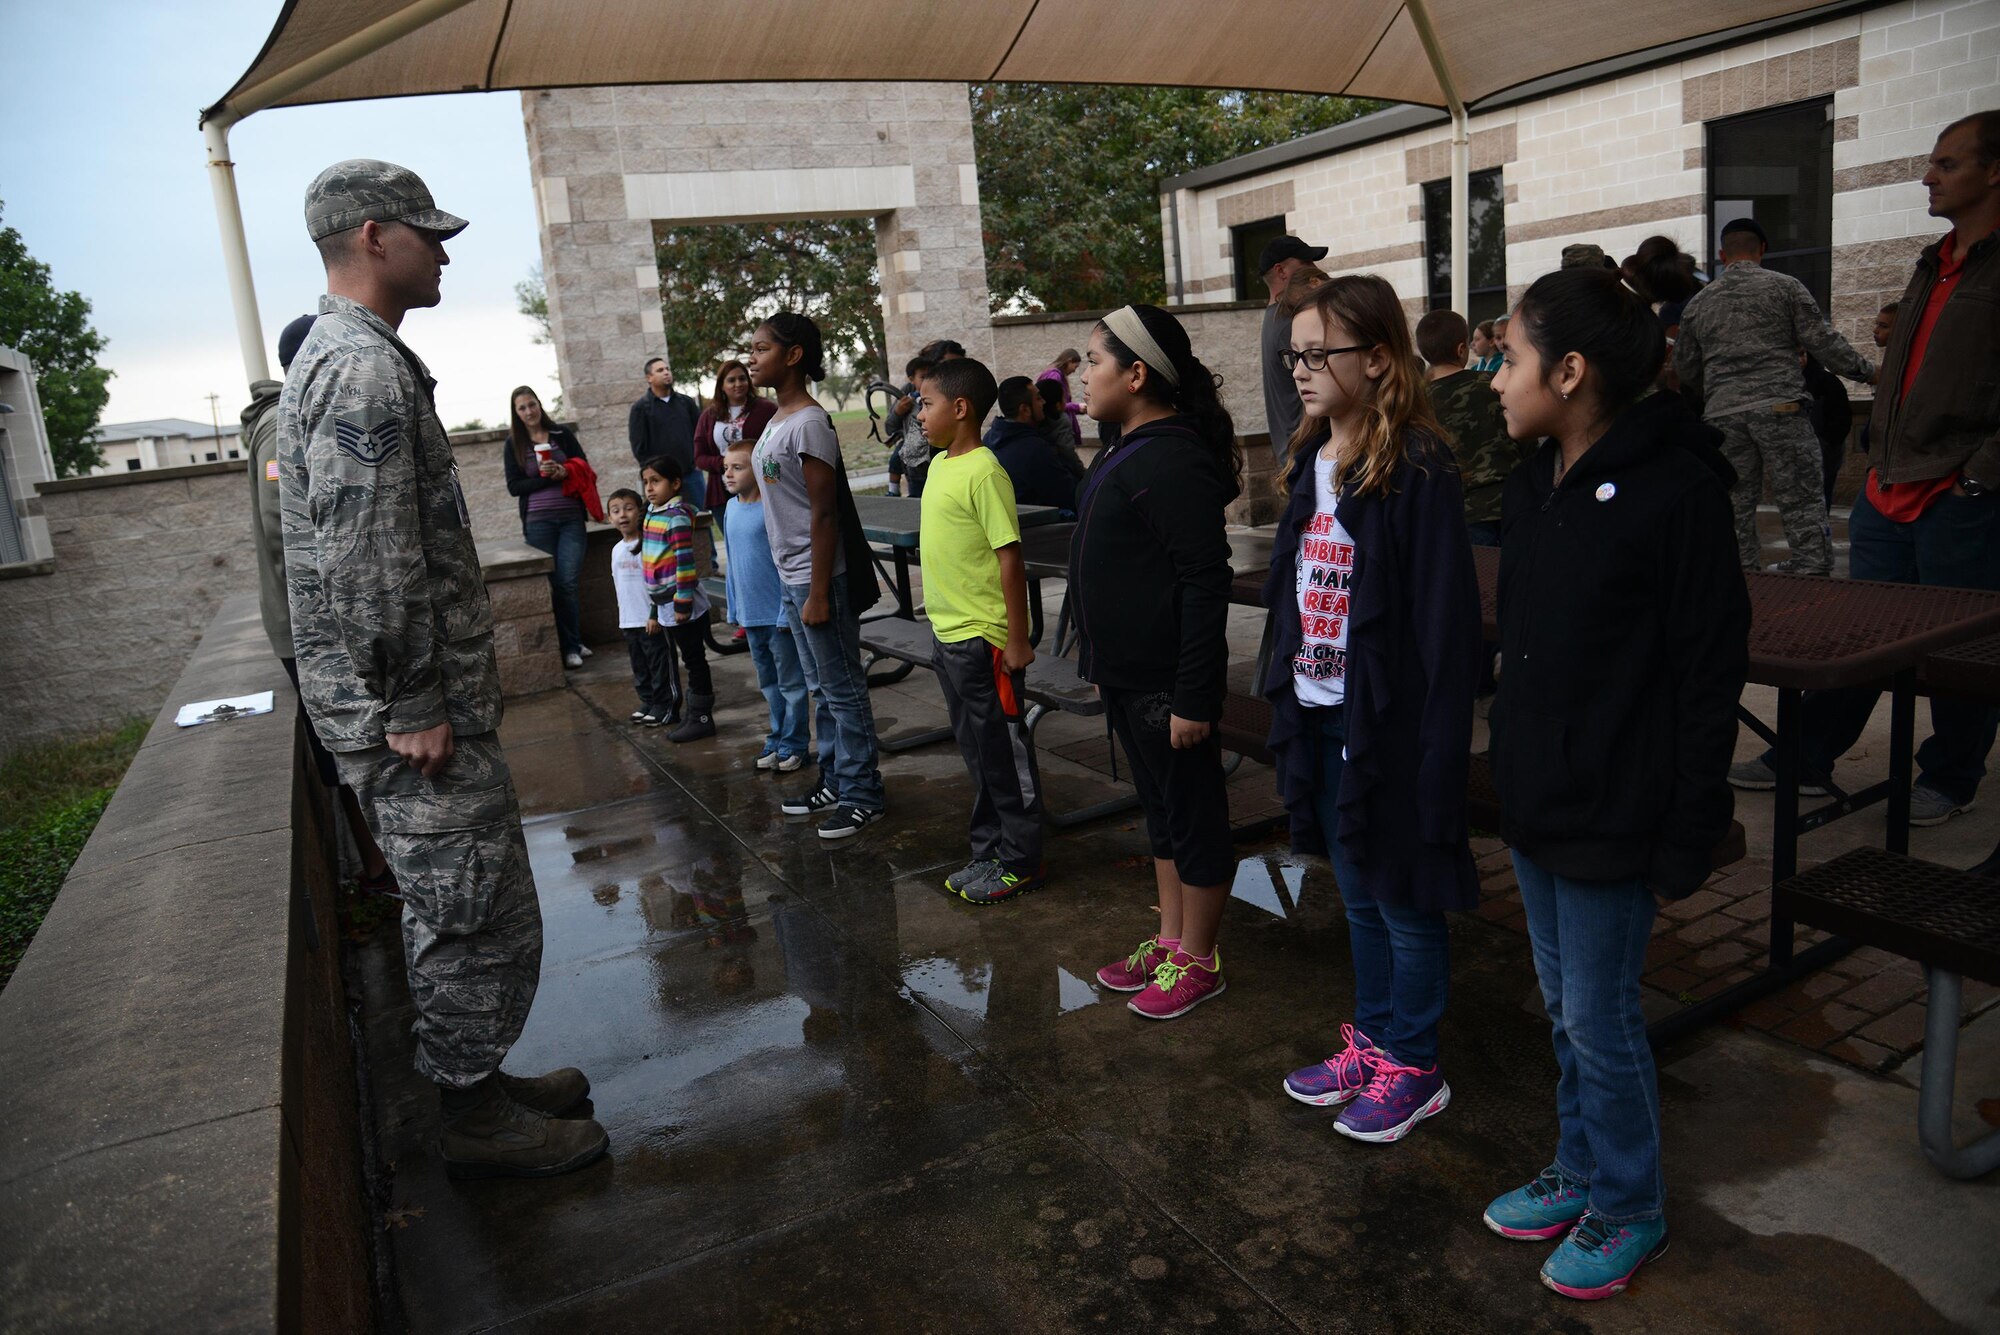 Laughlin members display the position of attention to military and local children on Laughlin Air Force Base, Texas, Nov. 7, 2015. During Operation XL, the children learned how to stand at the positions of attention and parade rest along with formation techniques. (U.S. Air Force photo by Airman 1st Class Ariel D. Partlow)